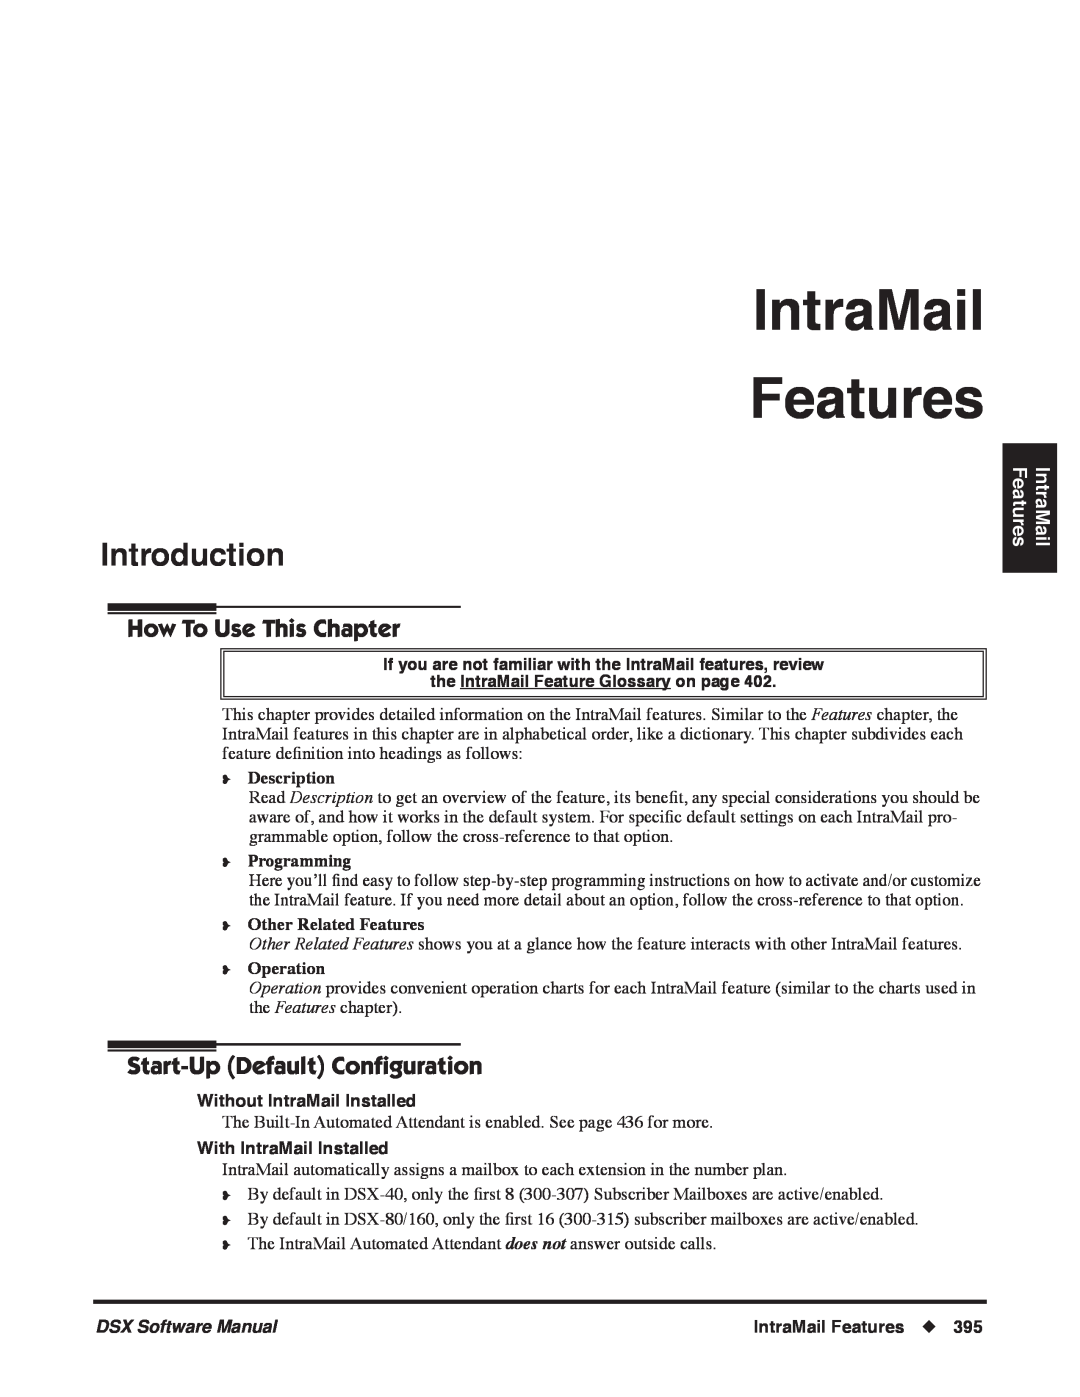 NEC IntraMail Features, Start-UpDefault Conﬁguration, Introduction, How To Use This Chapter, Description, Programming 